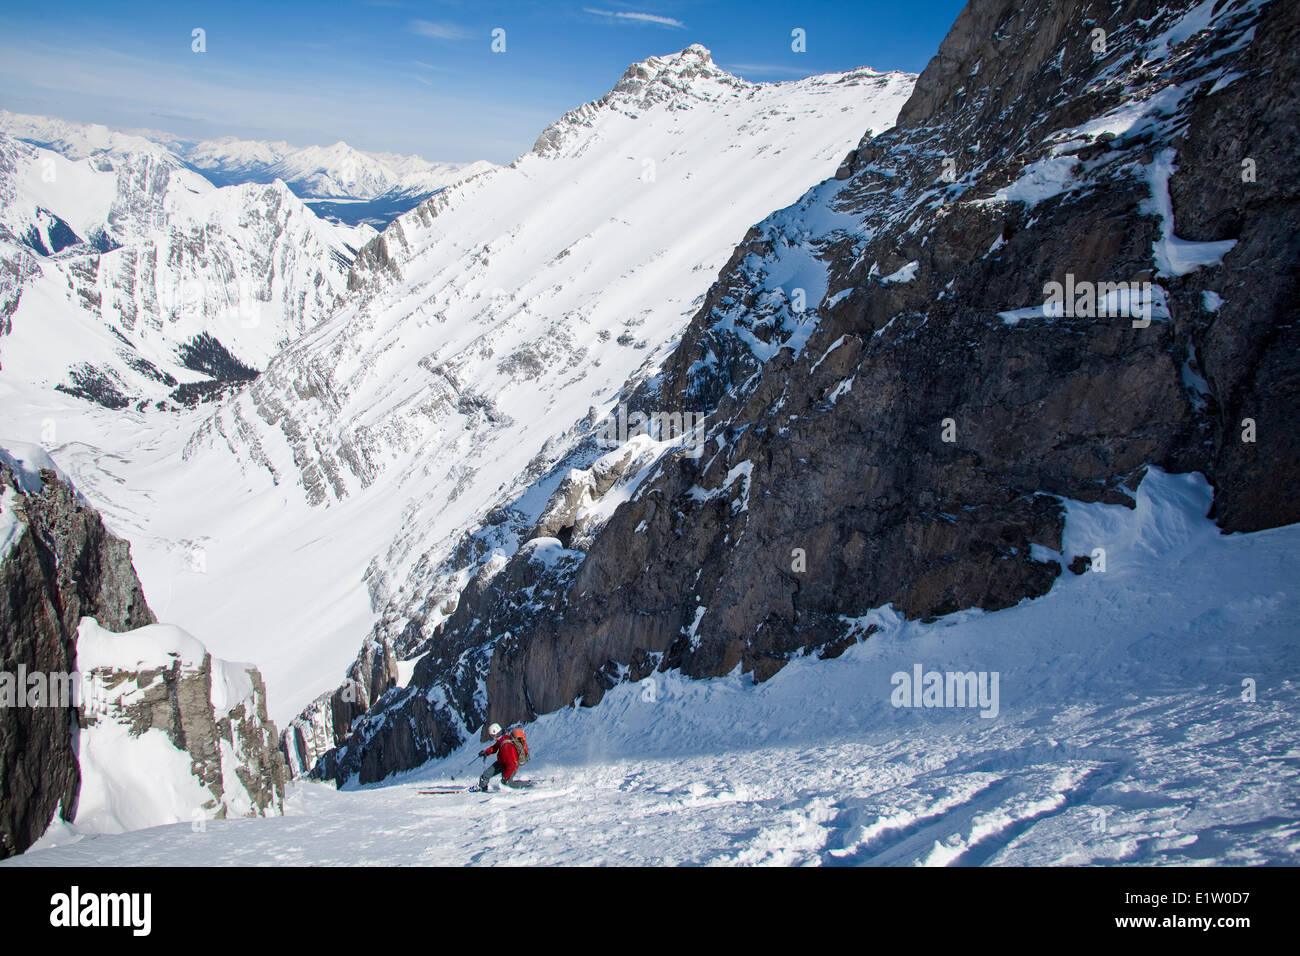 A male backcountry skier on tele skis descends a steep couloir with a unique limestone arch in it. Mt. French Peter Lougheed Stock Photo